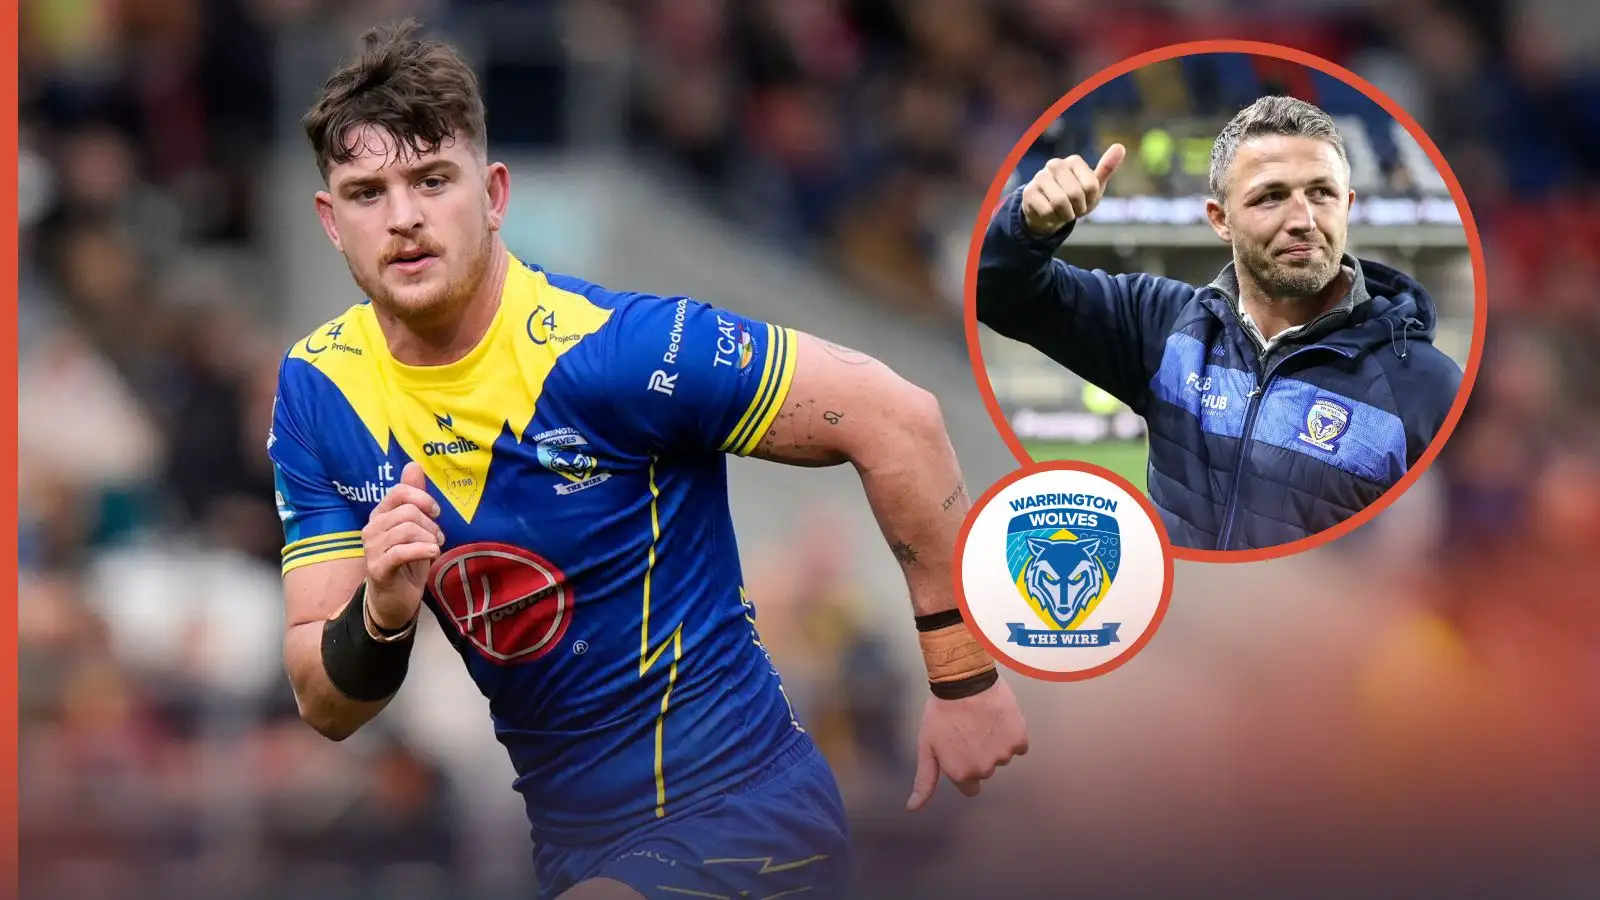 Jordan Crowther details how Warrington Wolves move has brought best out of him